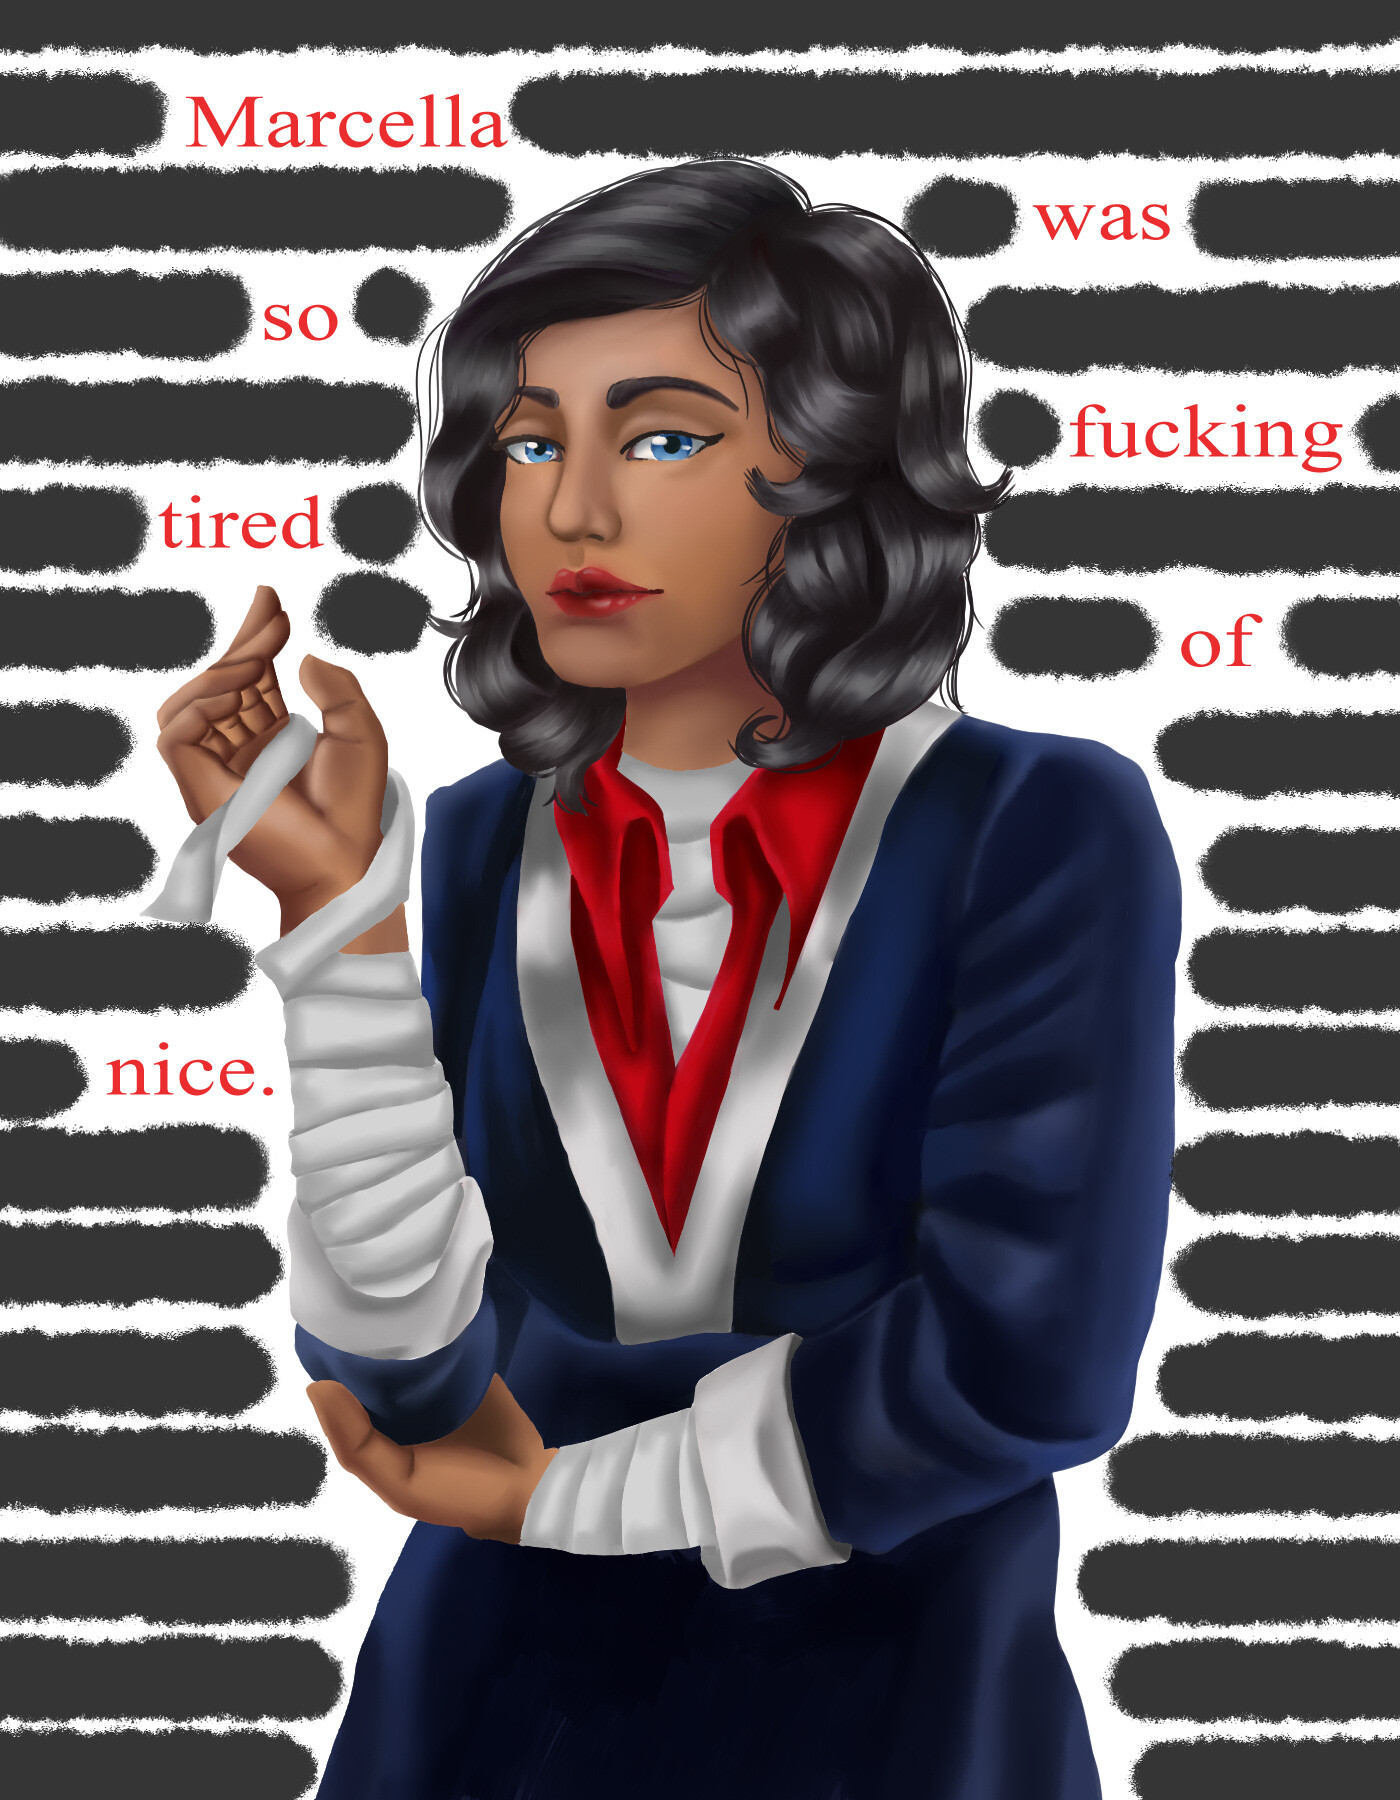 Character art of Marcella Riggins. She stands, one arm folded across her stomach to support the other, which is wrapped in a bandage, staring indifferently and straight ahead. The background reads, "Marcella was so fucking tired of nice."